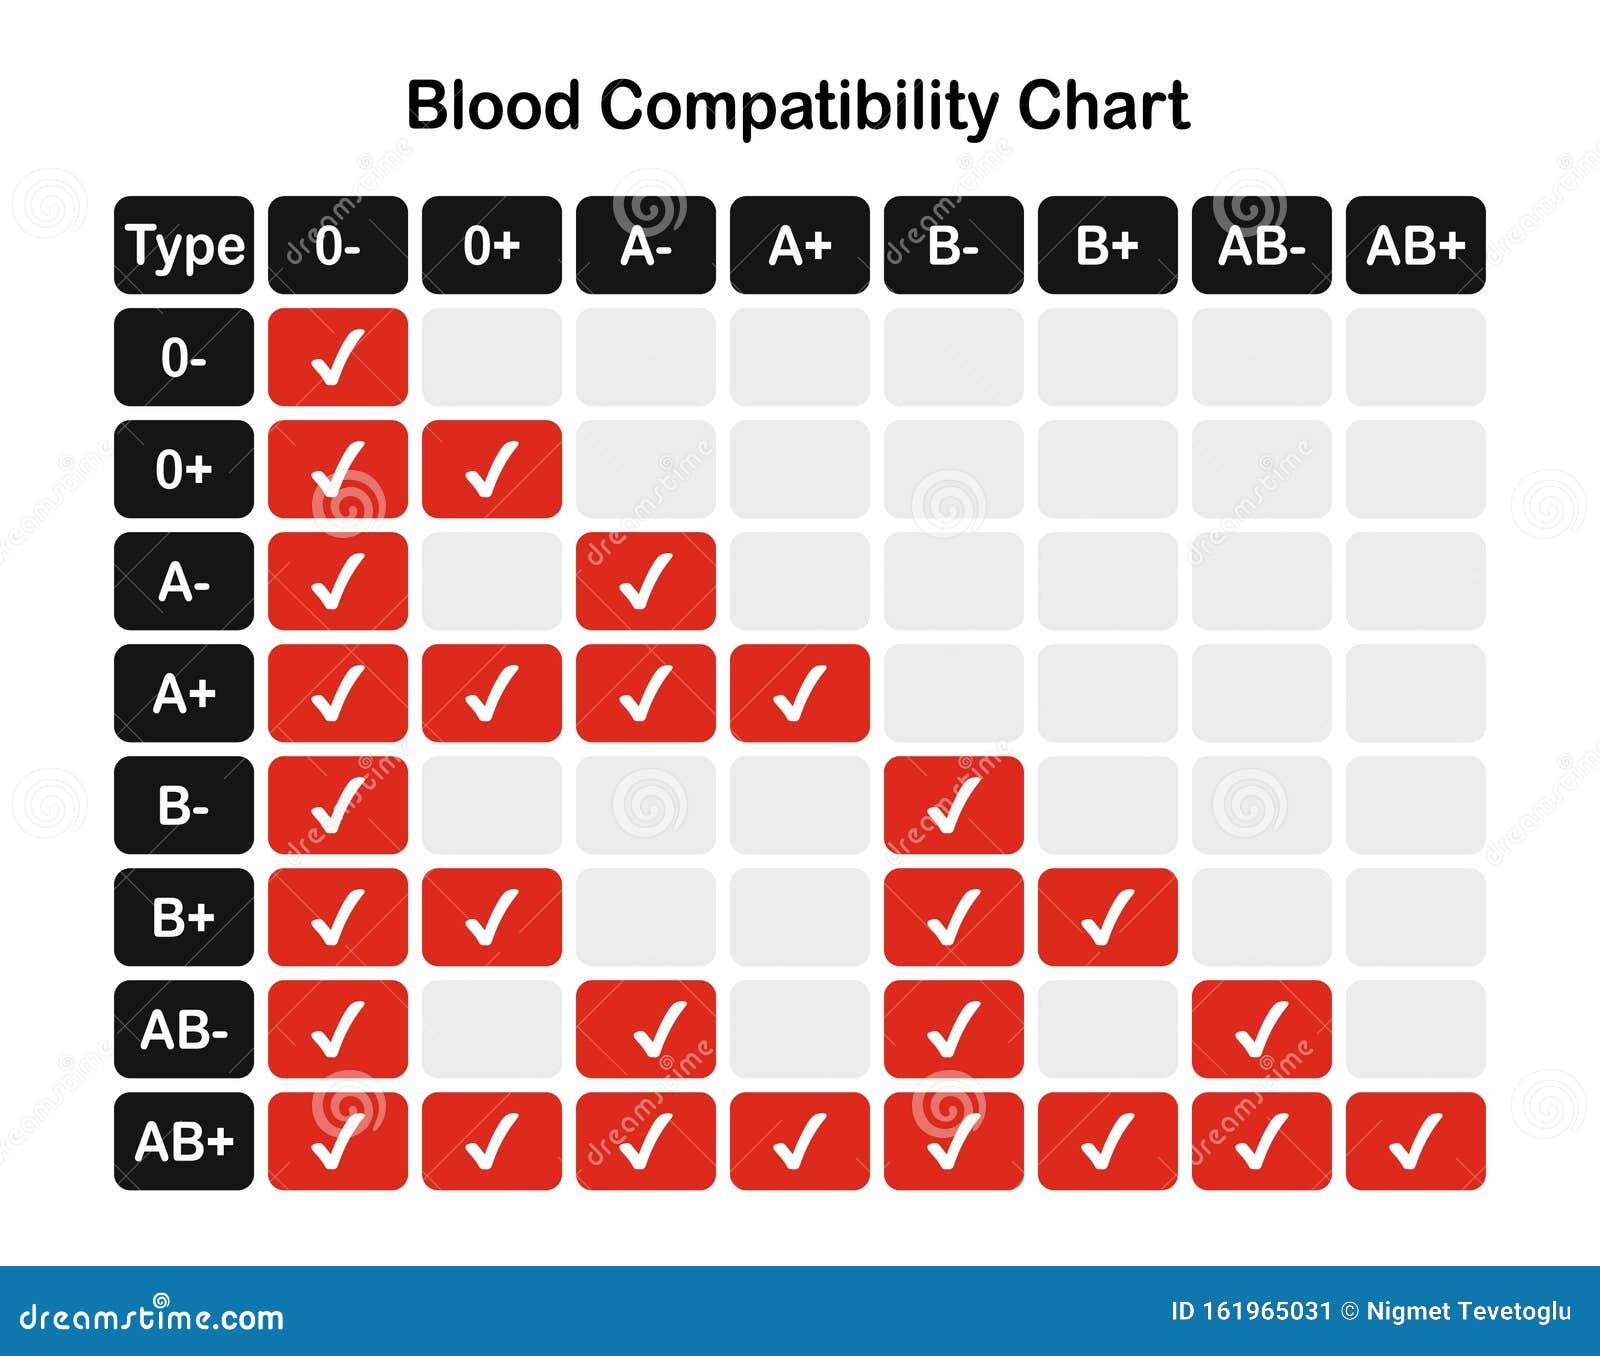 Blood Type Chart Donor Blood Vector Illustration Stock Vector Illustration Of Compatibility Graphic 161965031